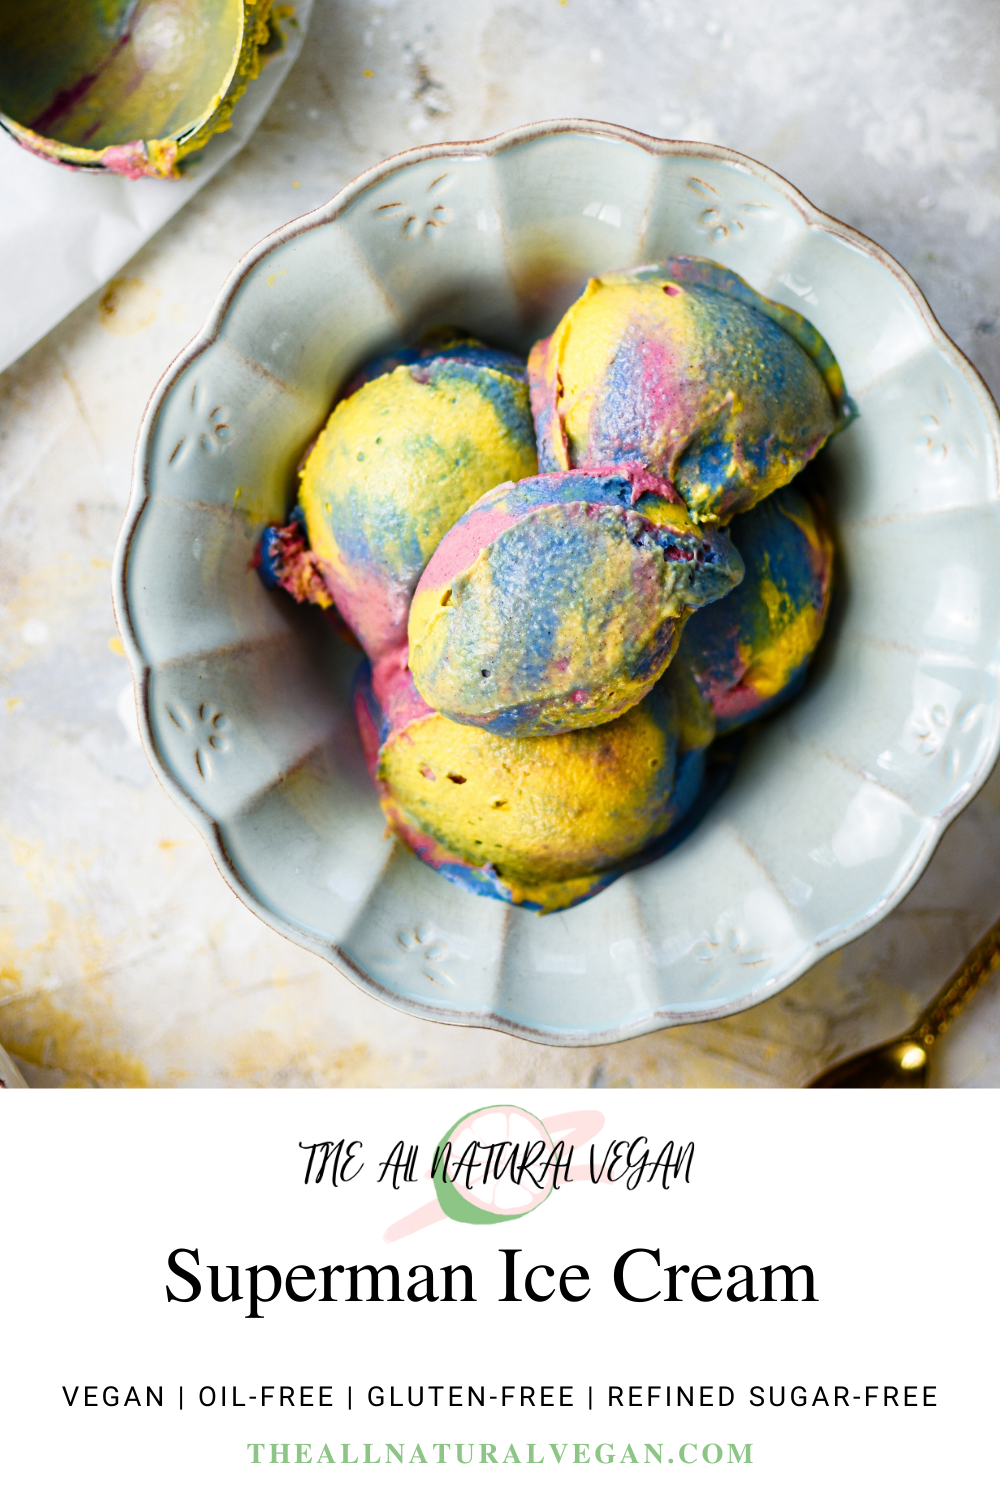 superman ice cream recipes card stating this recipe is oil-free, refined sugar-free, gluten-free, dairy-free, and made with natural colors